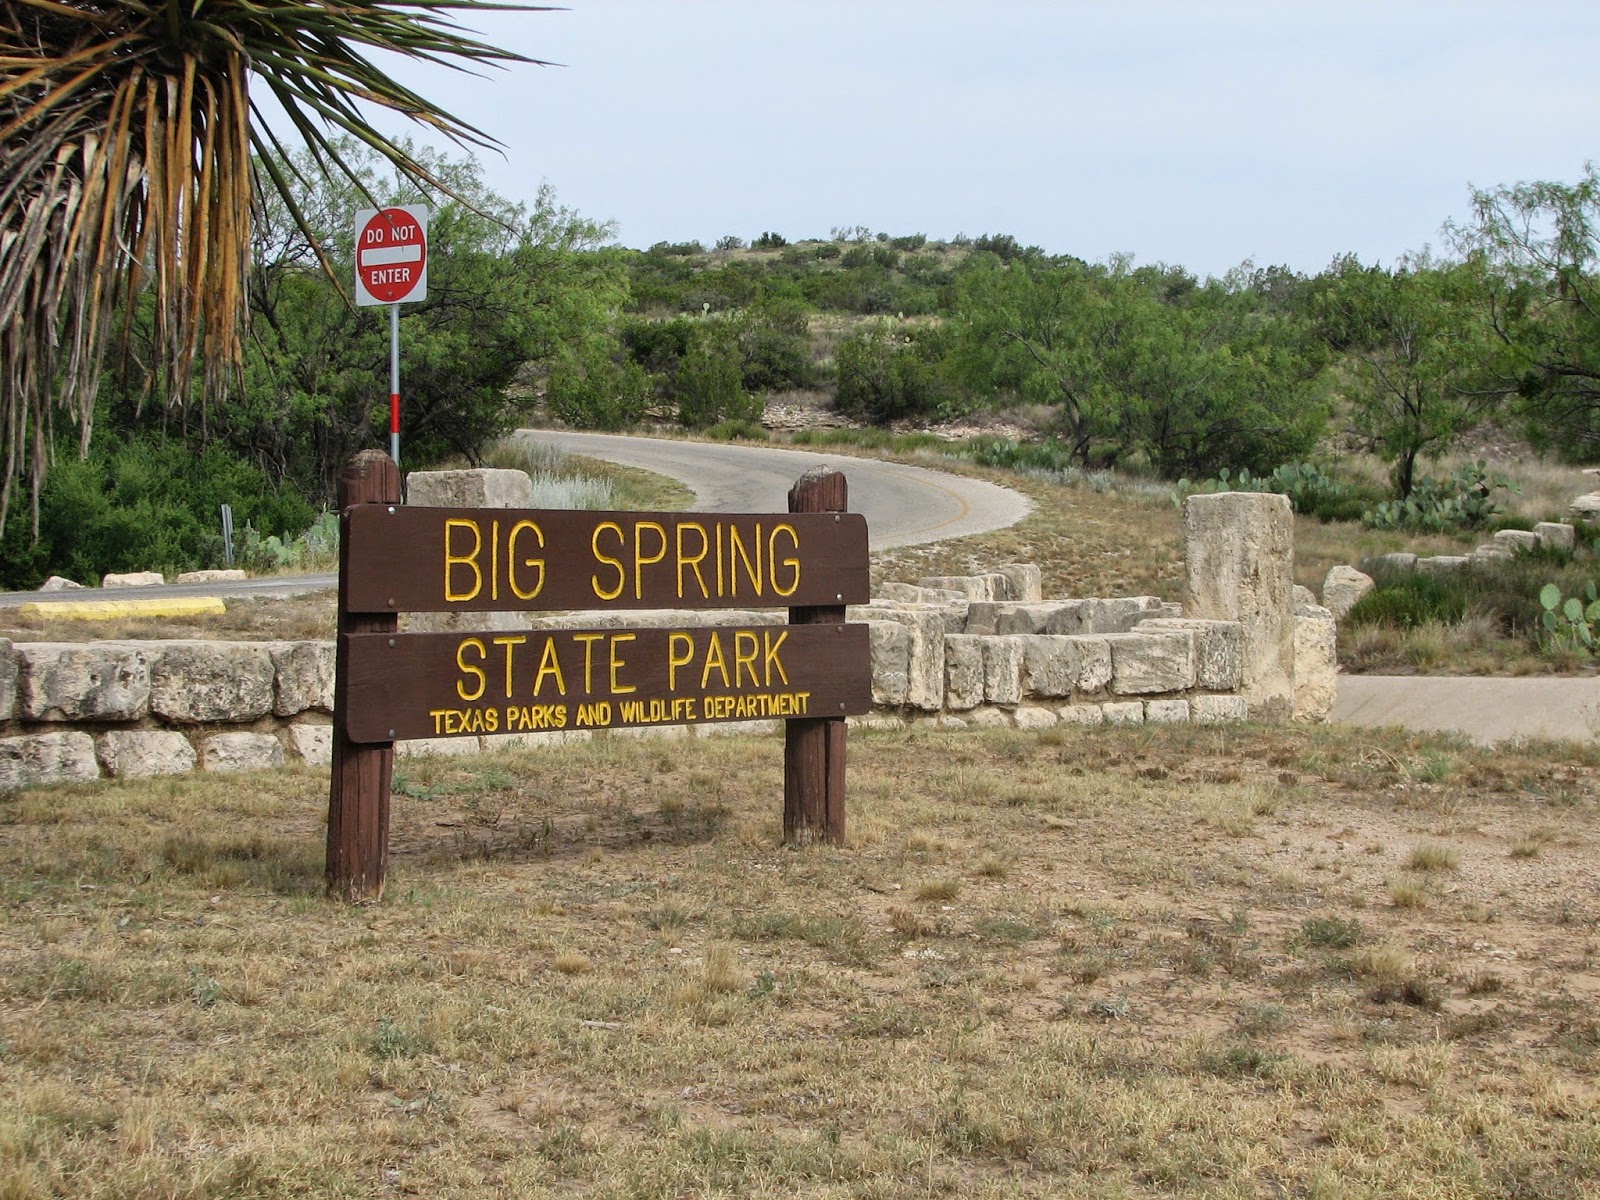 S/V Wand'rin Star: Road Trip to Big Spring, Texas